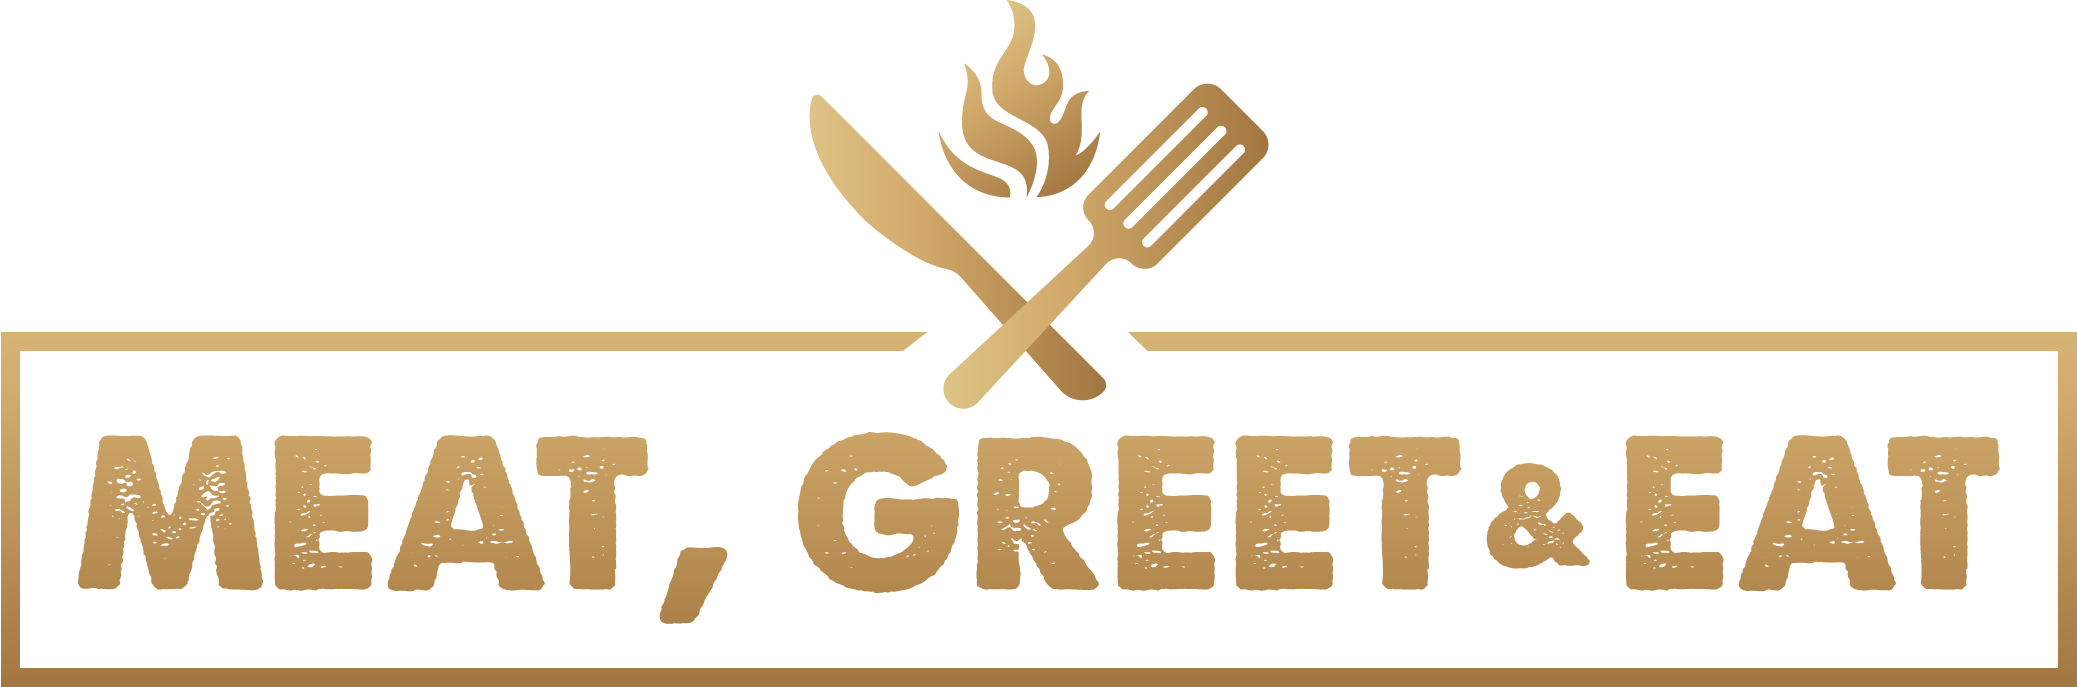 Meat, Greet and Eat Logo